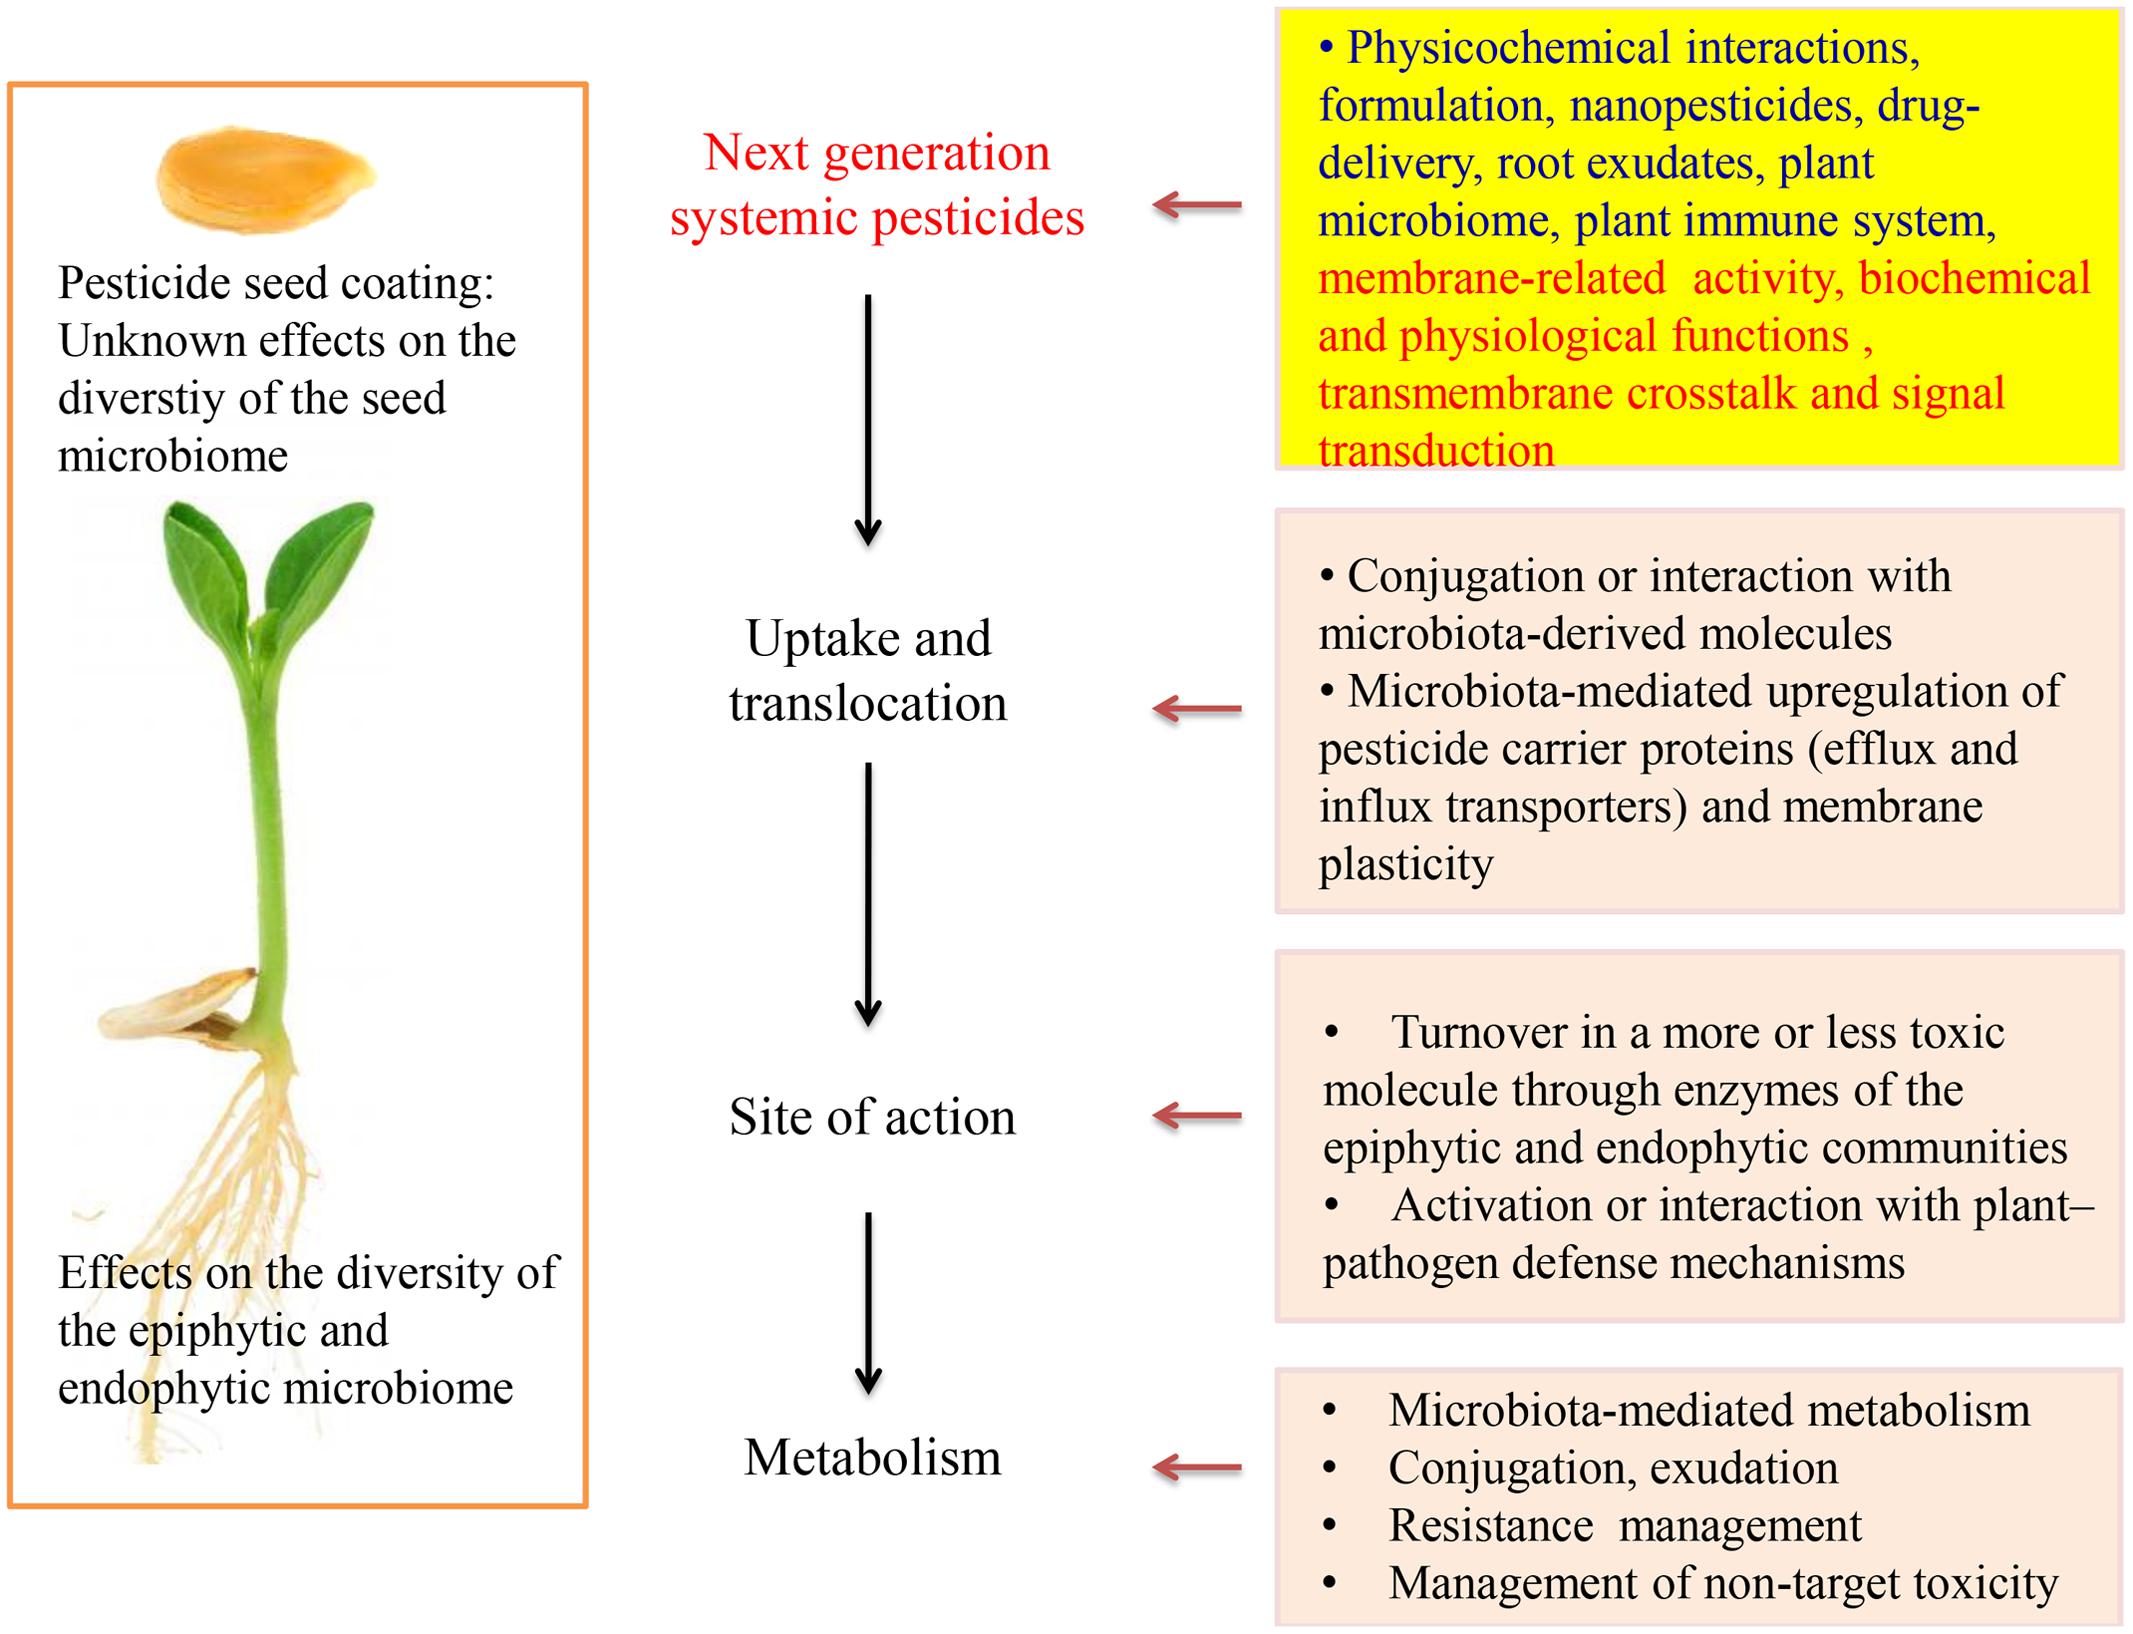 The Plant as Metaorganism and Research on Systemic Pesticides – Prospects and Challenges